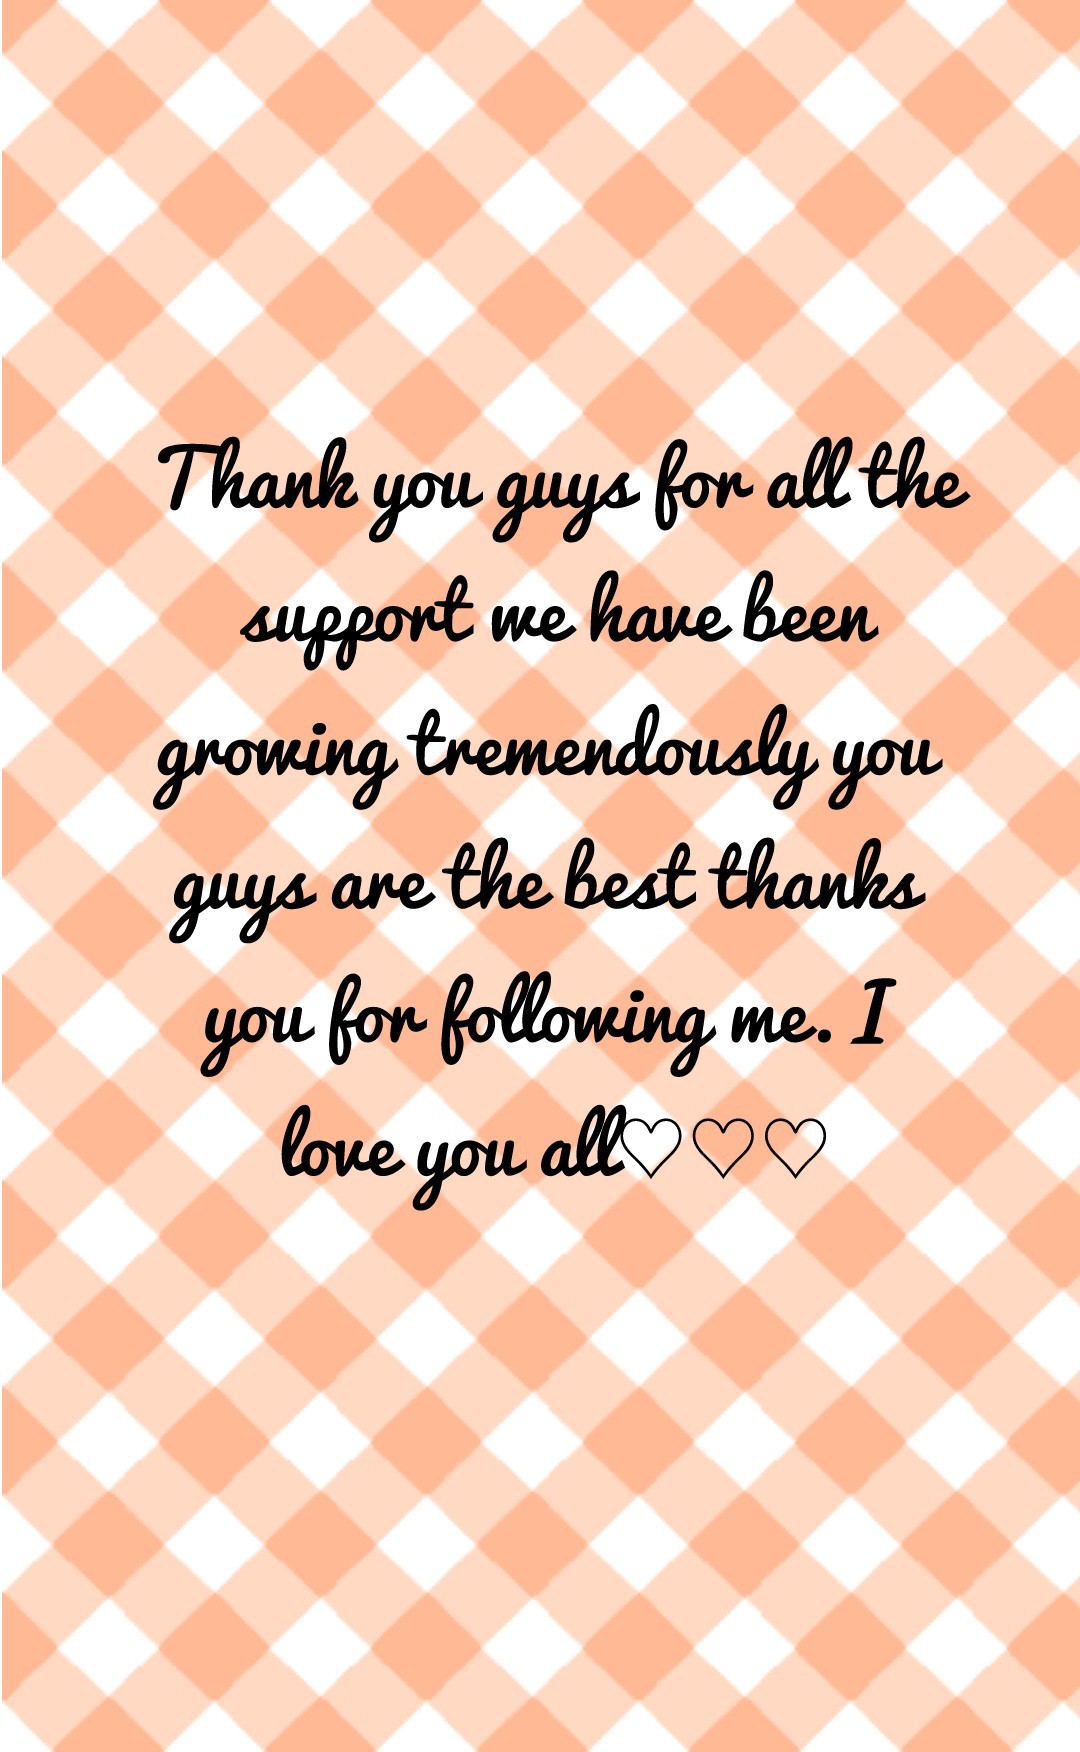 Thank you all so much for the support you guys rock. ILY♡♡♡